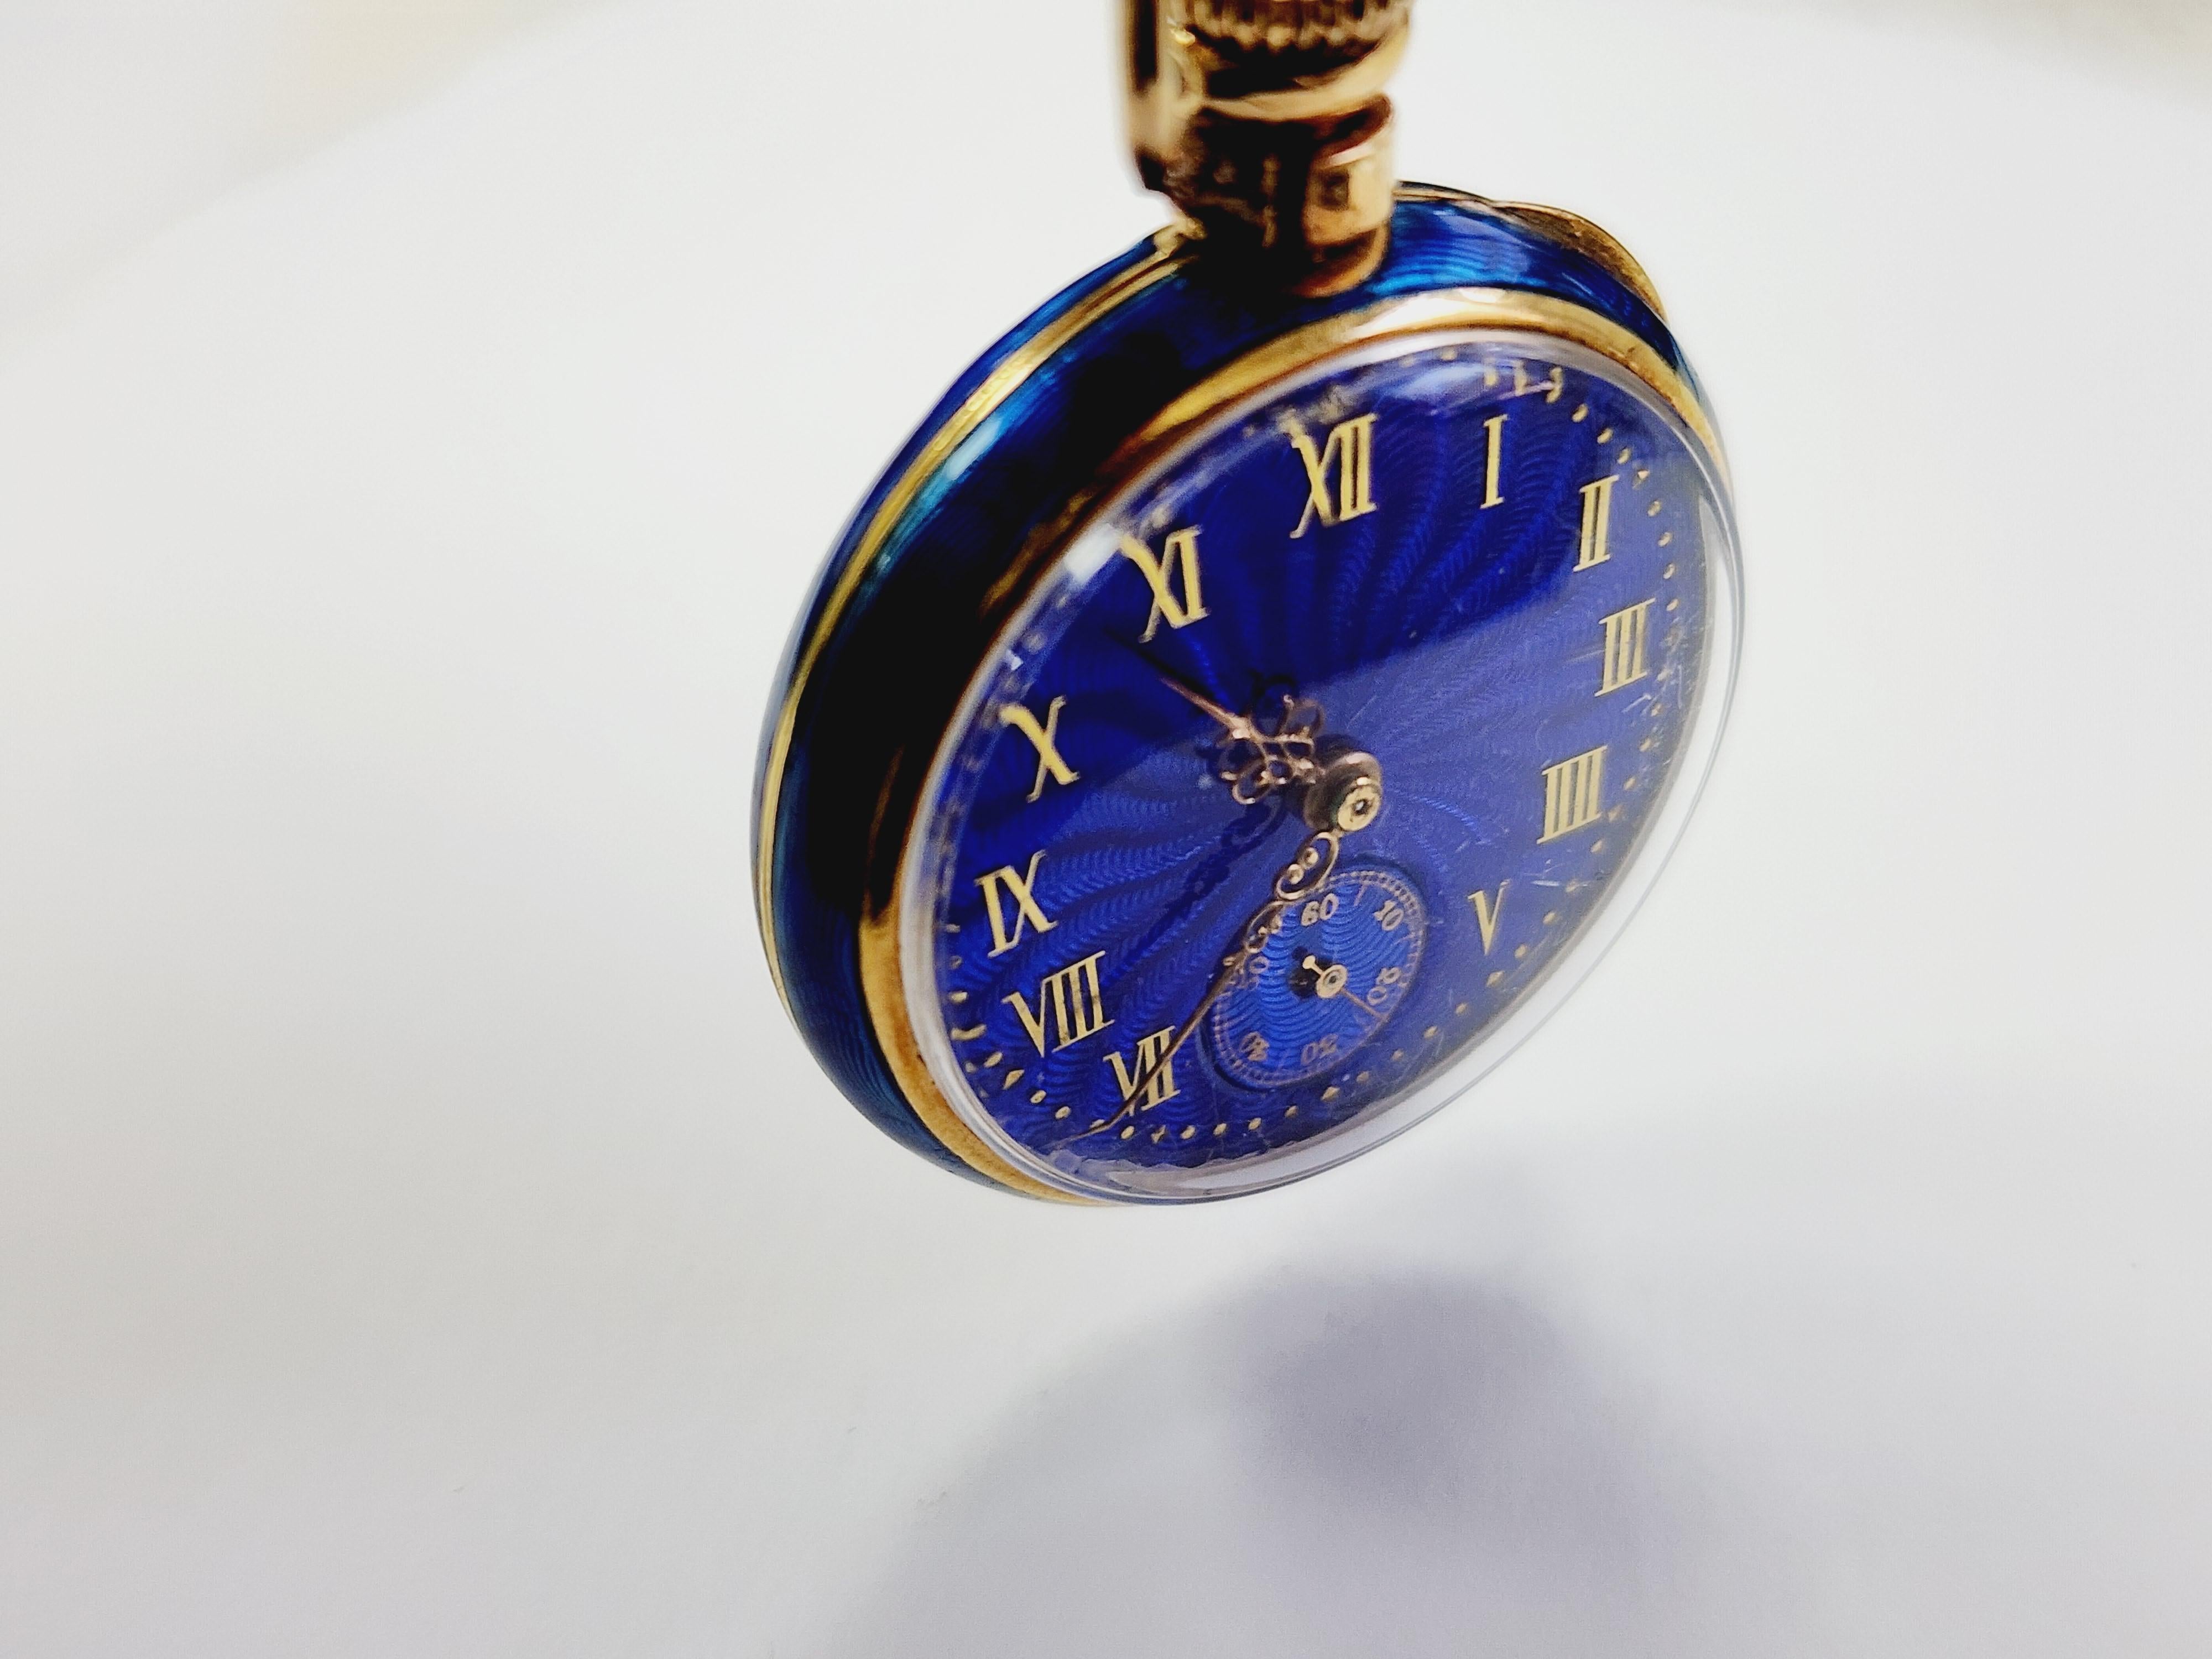 Tiffany & Co. Vintage 18 Karat Blue Enamel Pendant Watch In Fair Condition For Sale In Great Neck, NY